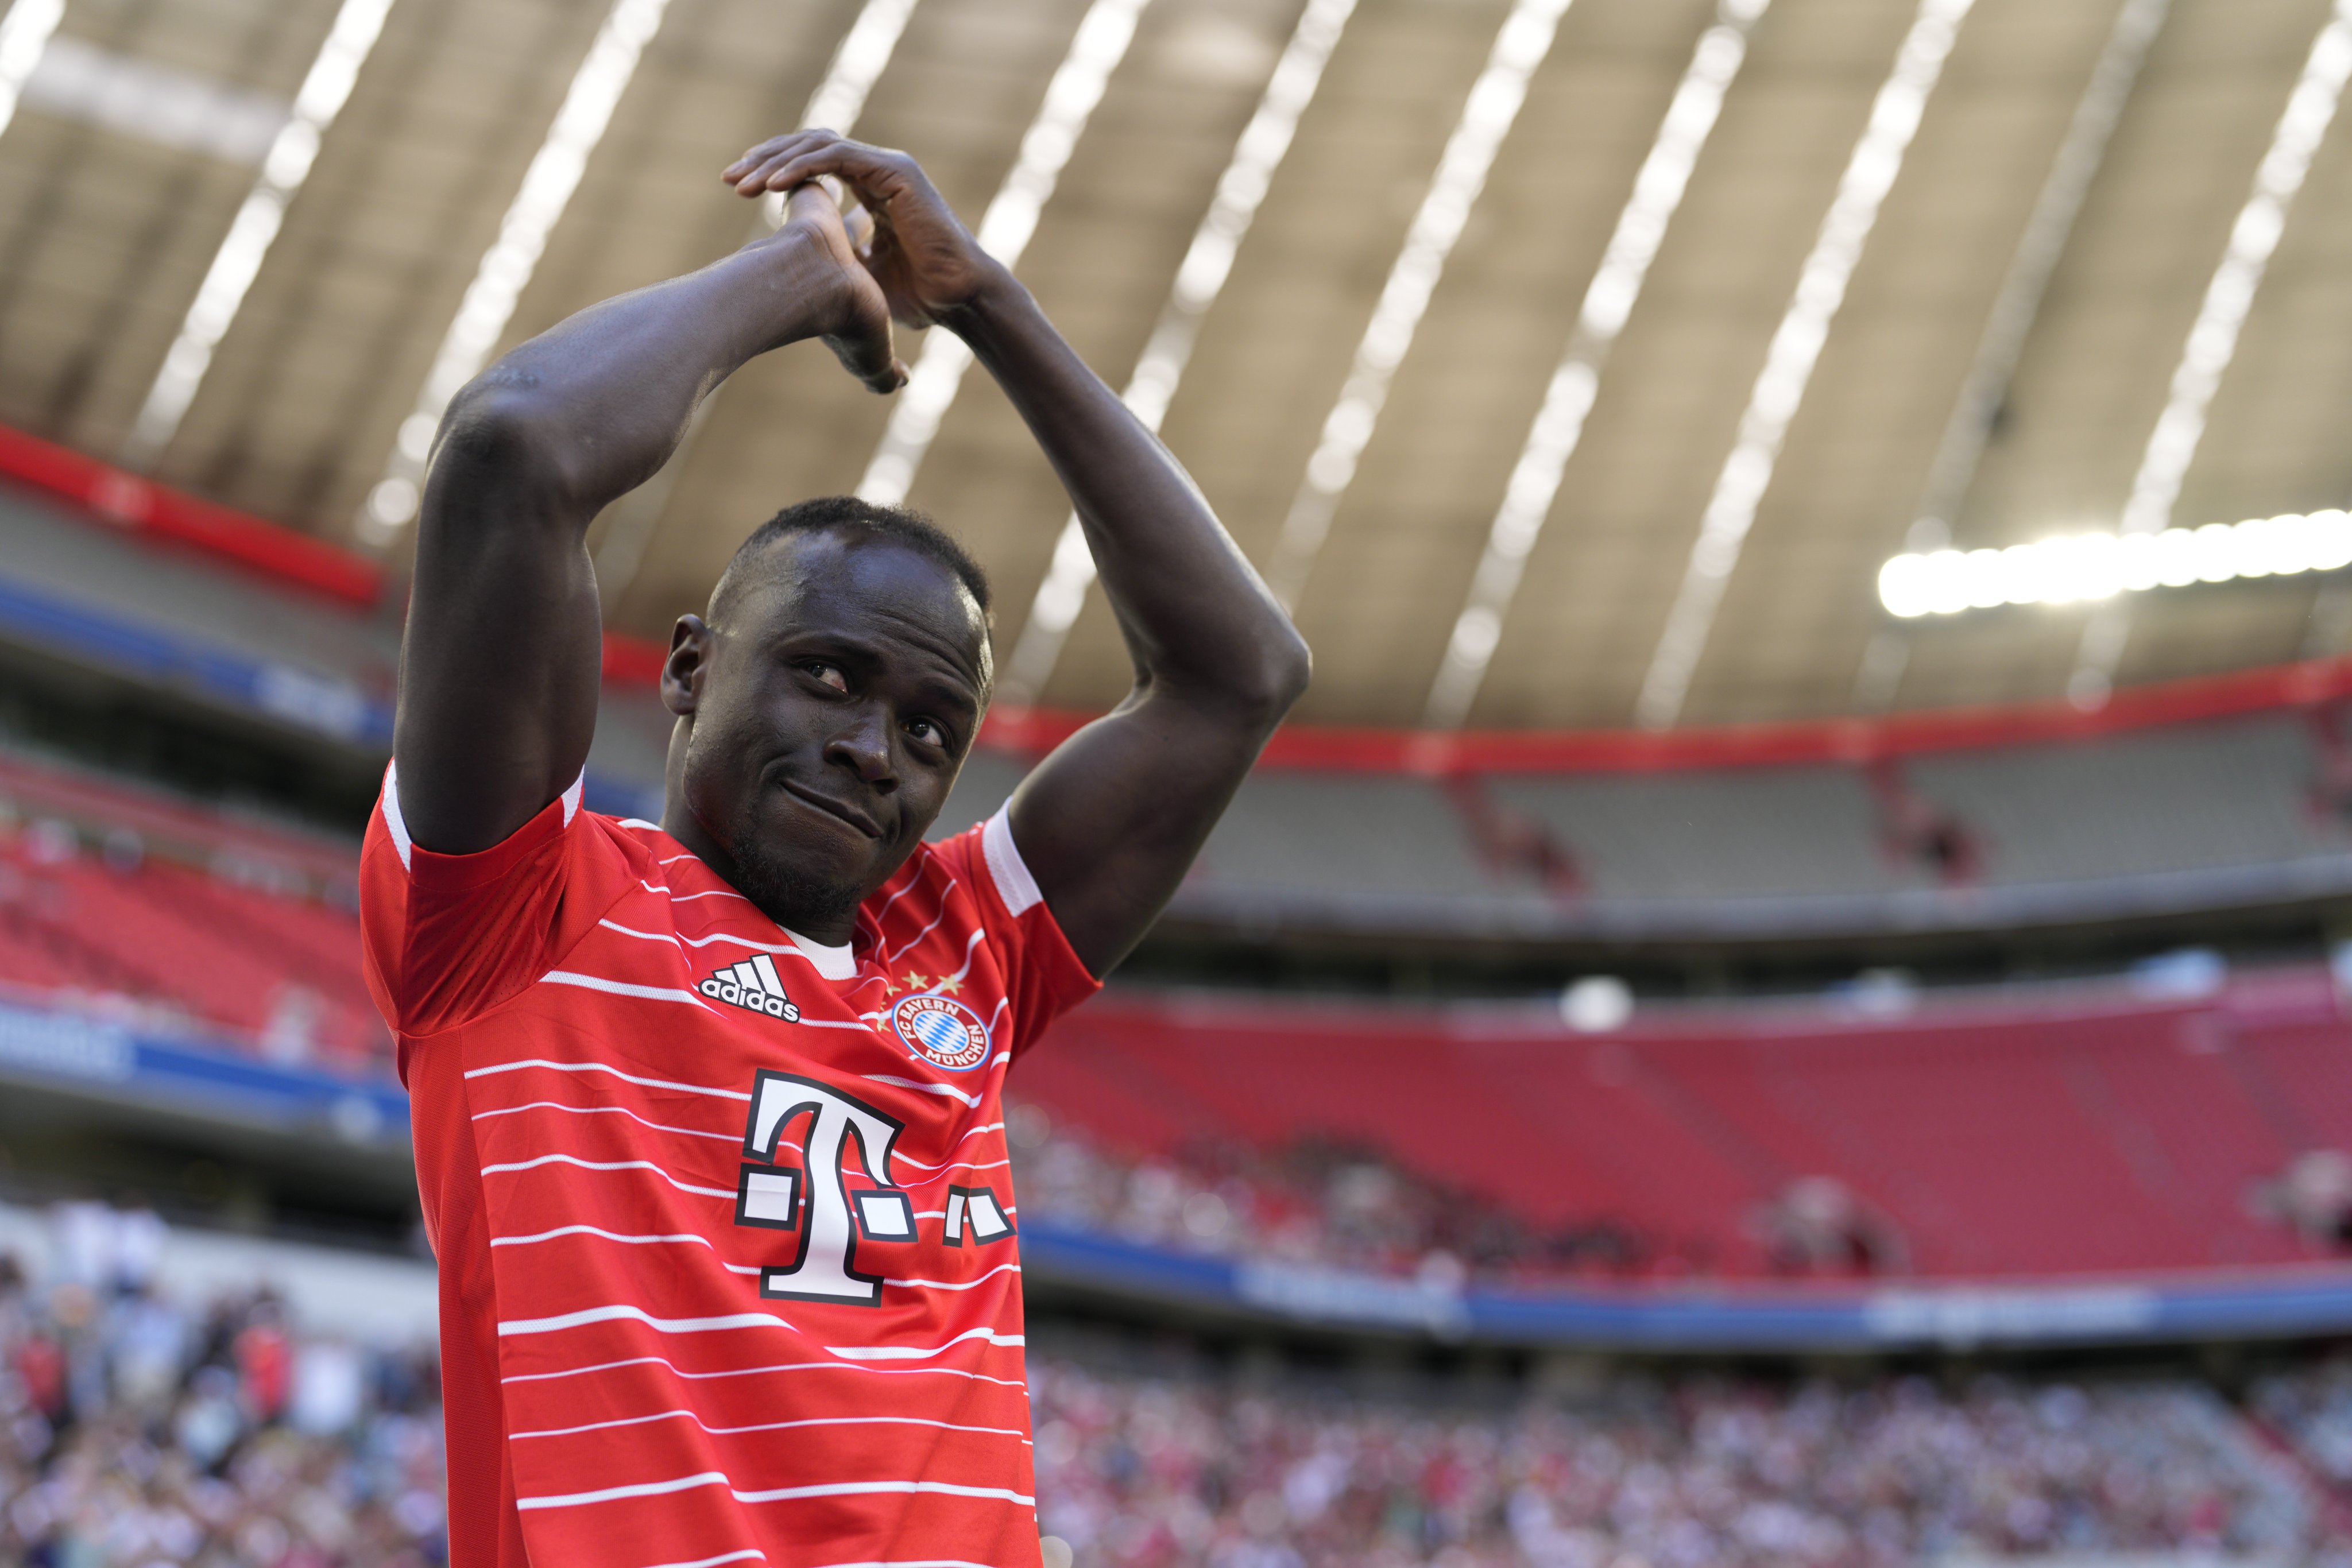 This is my dream and I’m really happy to be at this great club, proclaims Sadio Mane